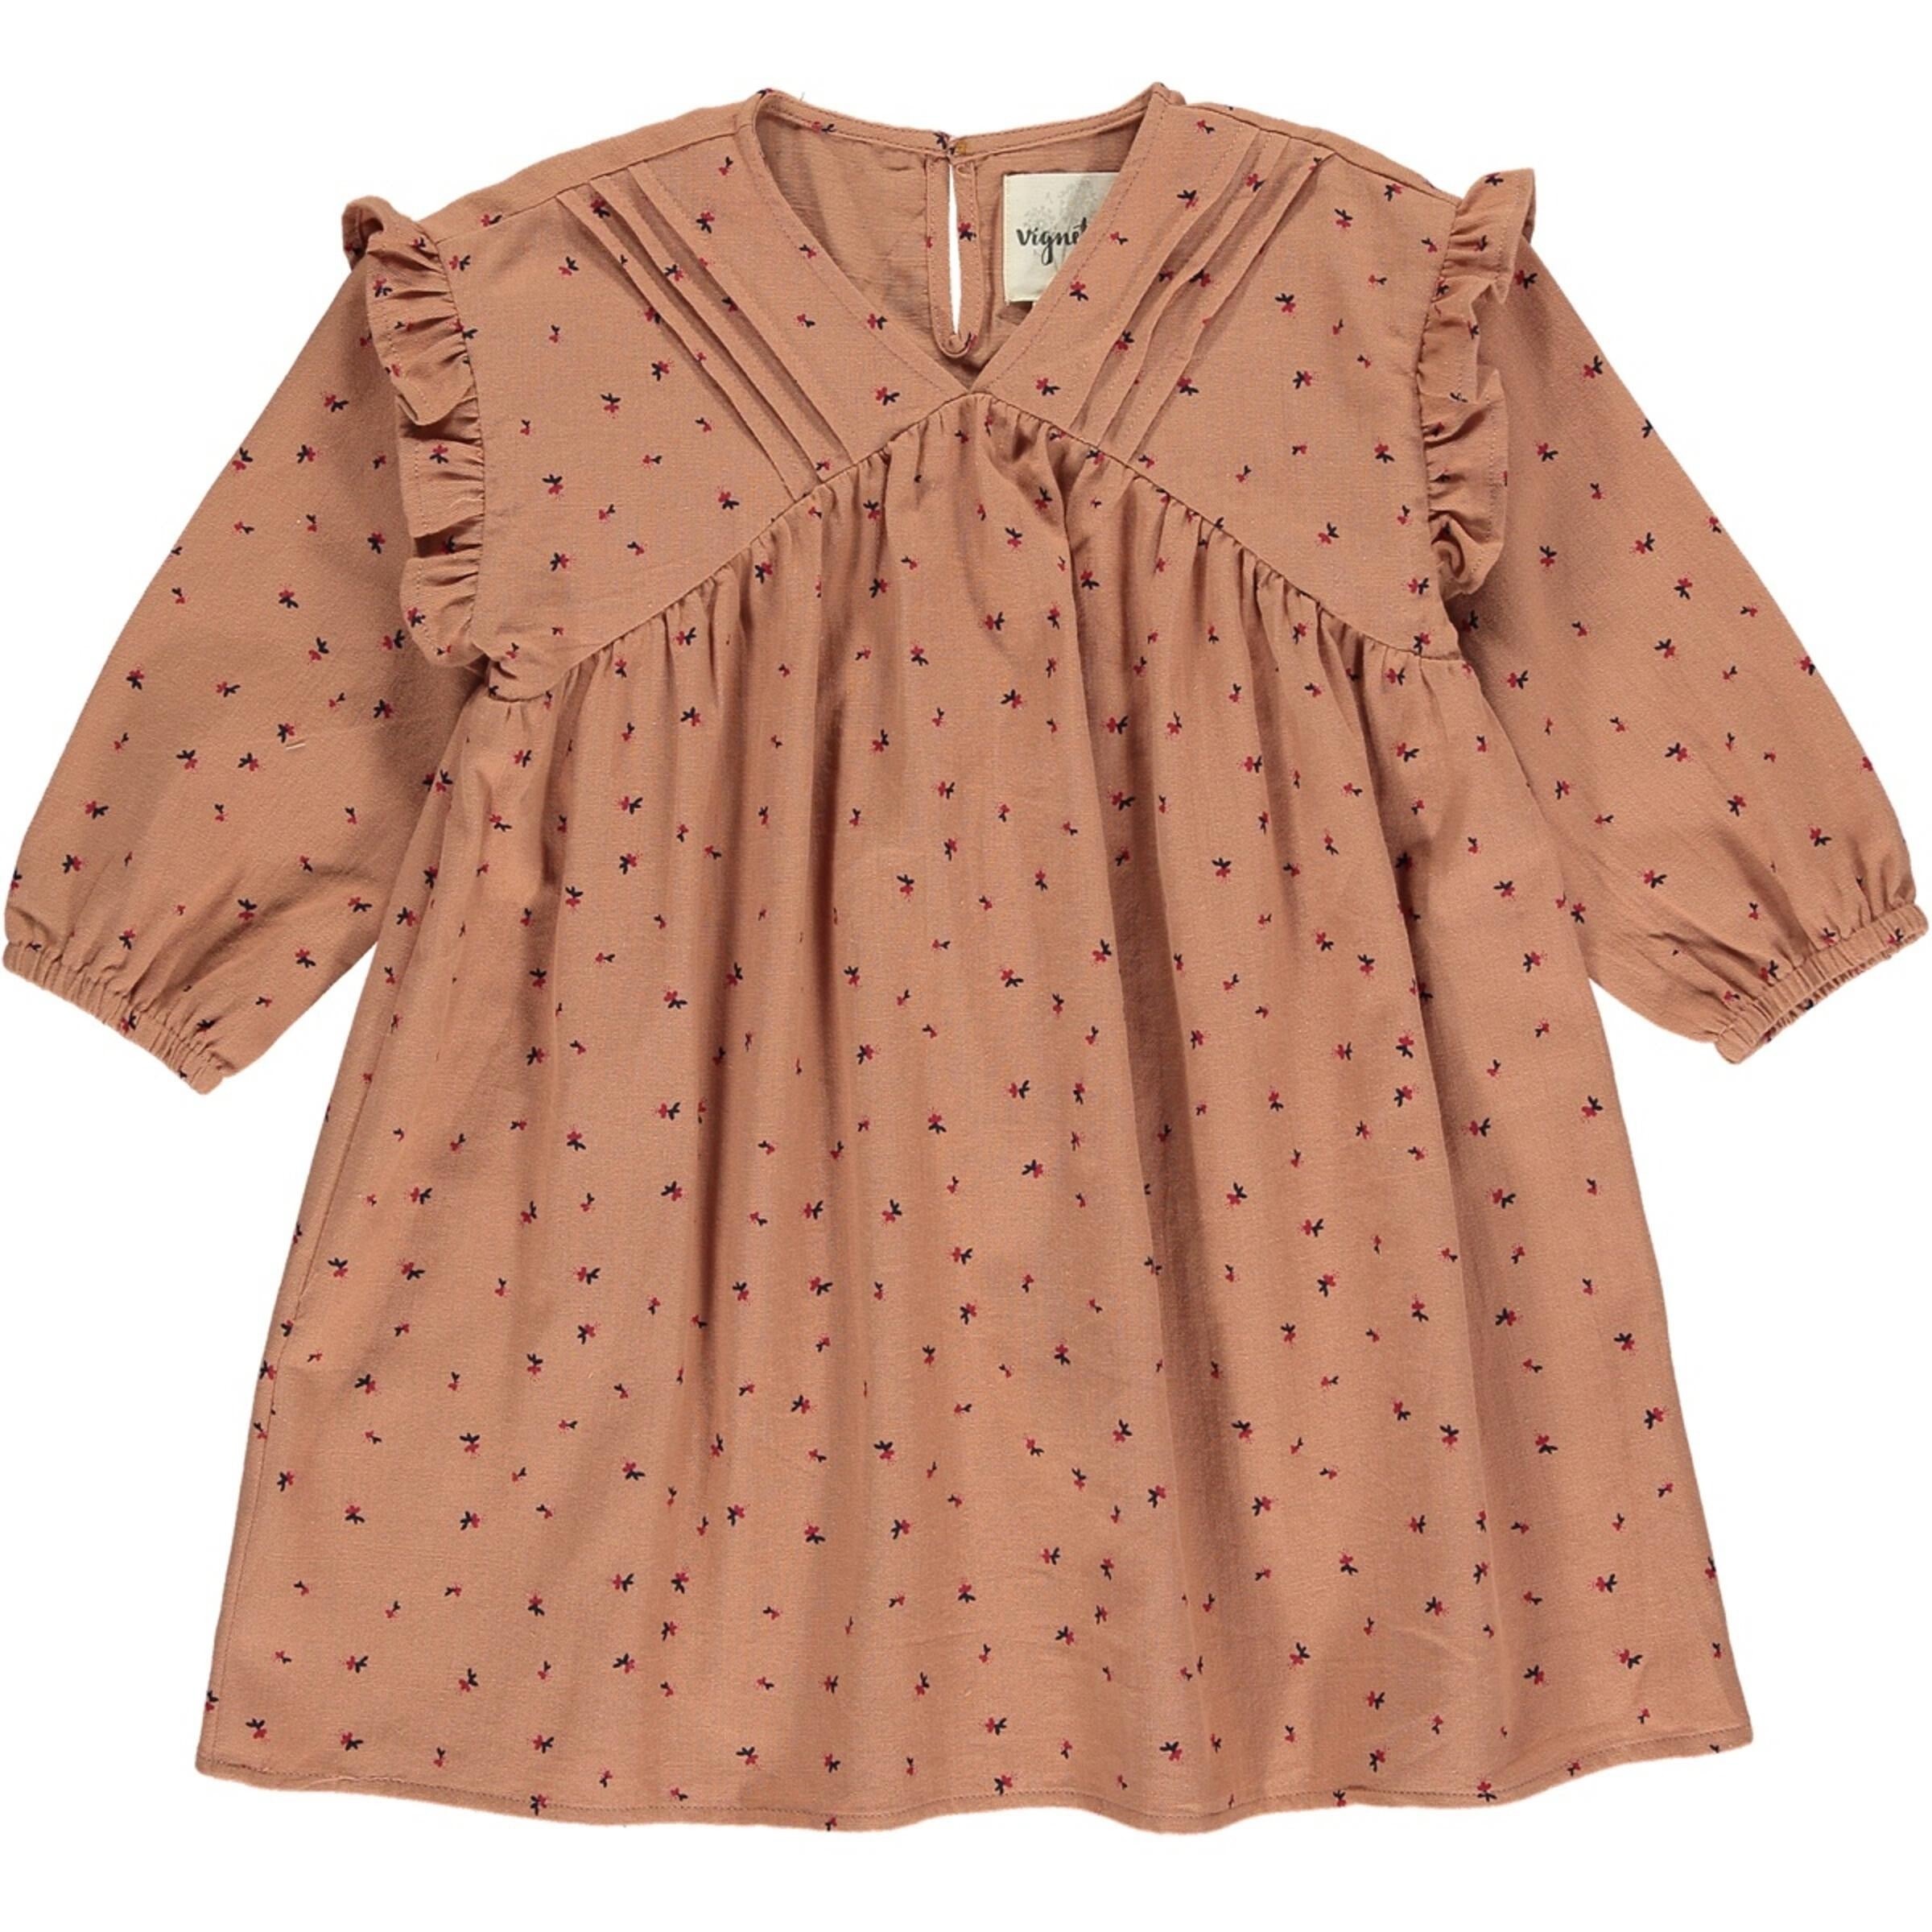 Pumpkin colored dress with berry floral print and ruffled sleeve.